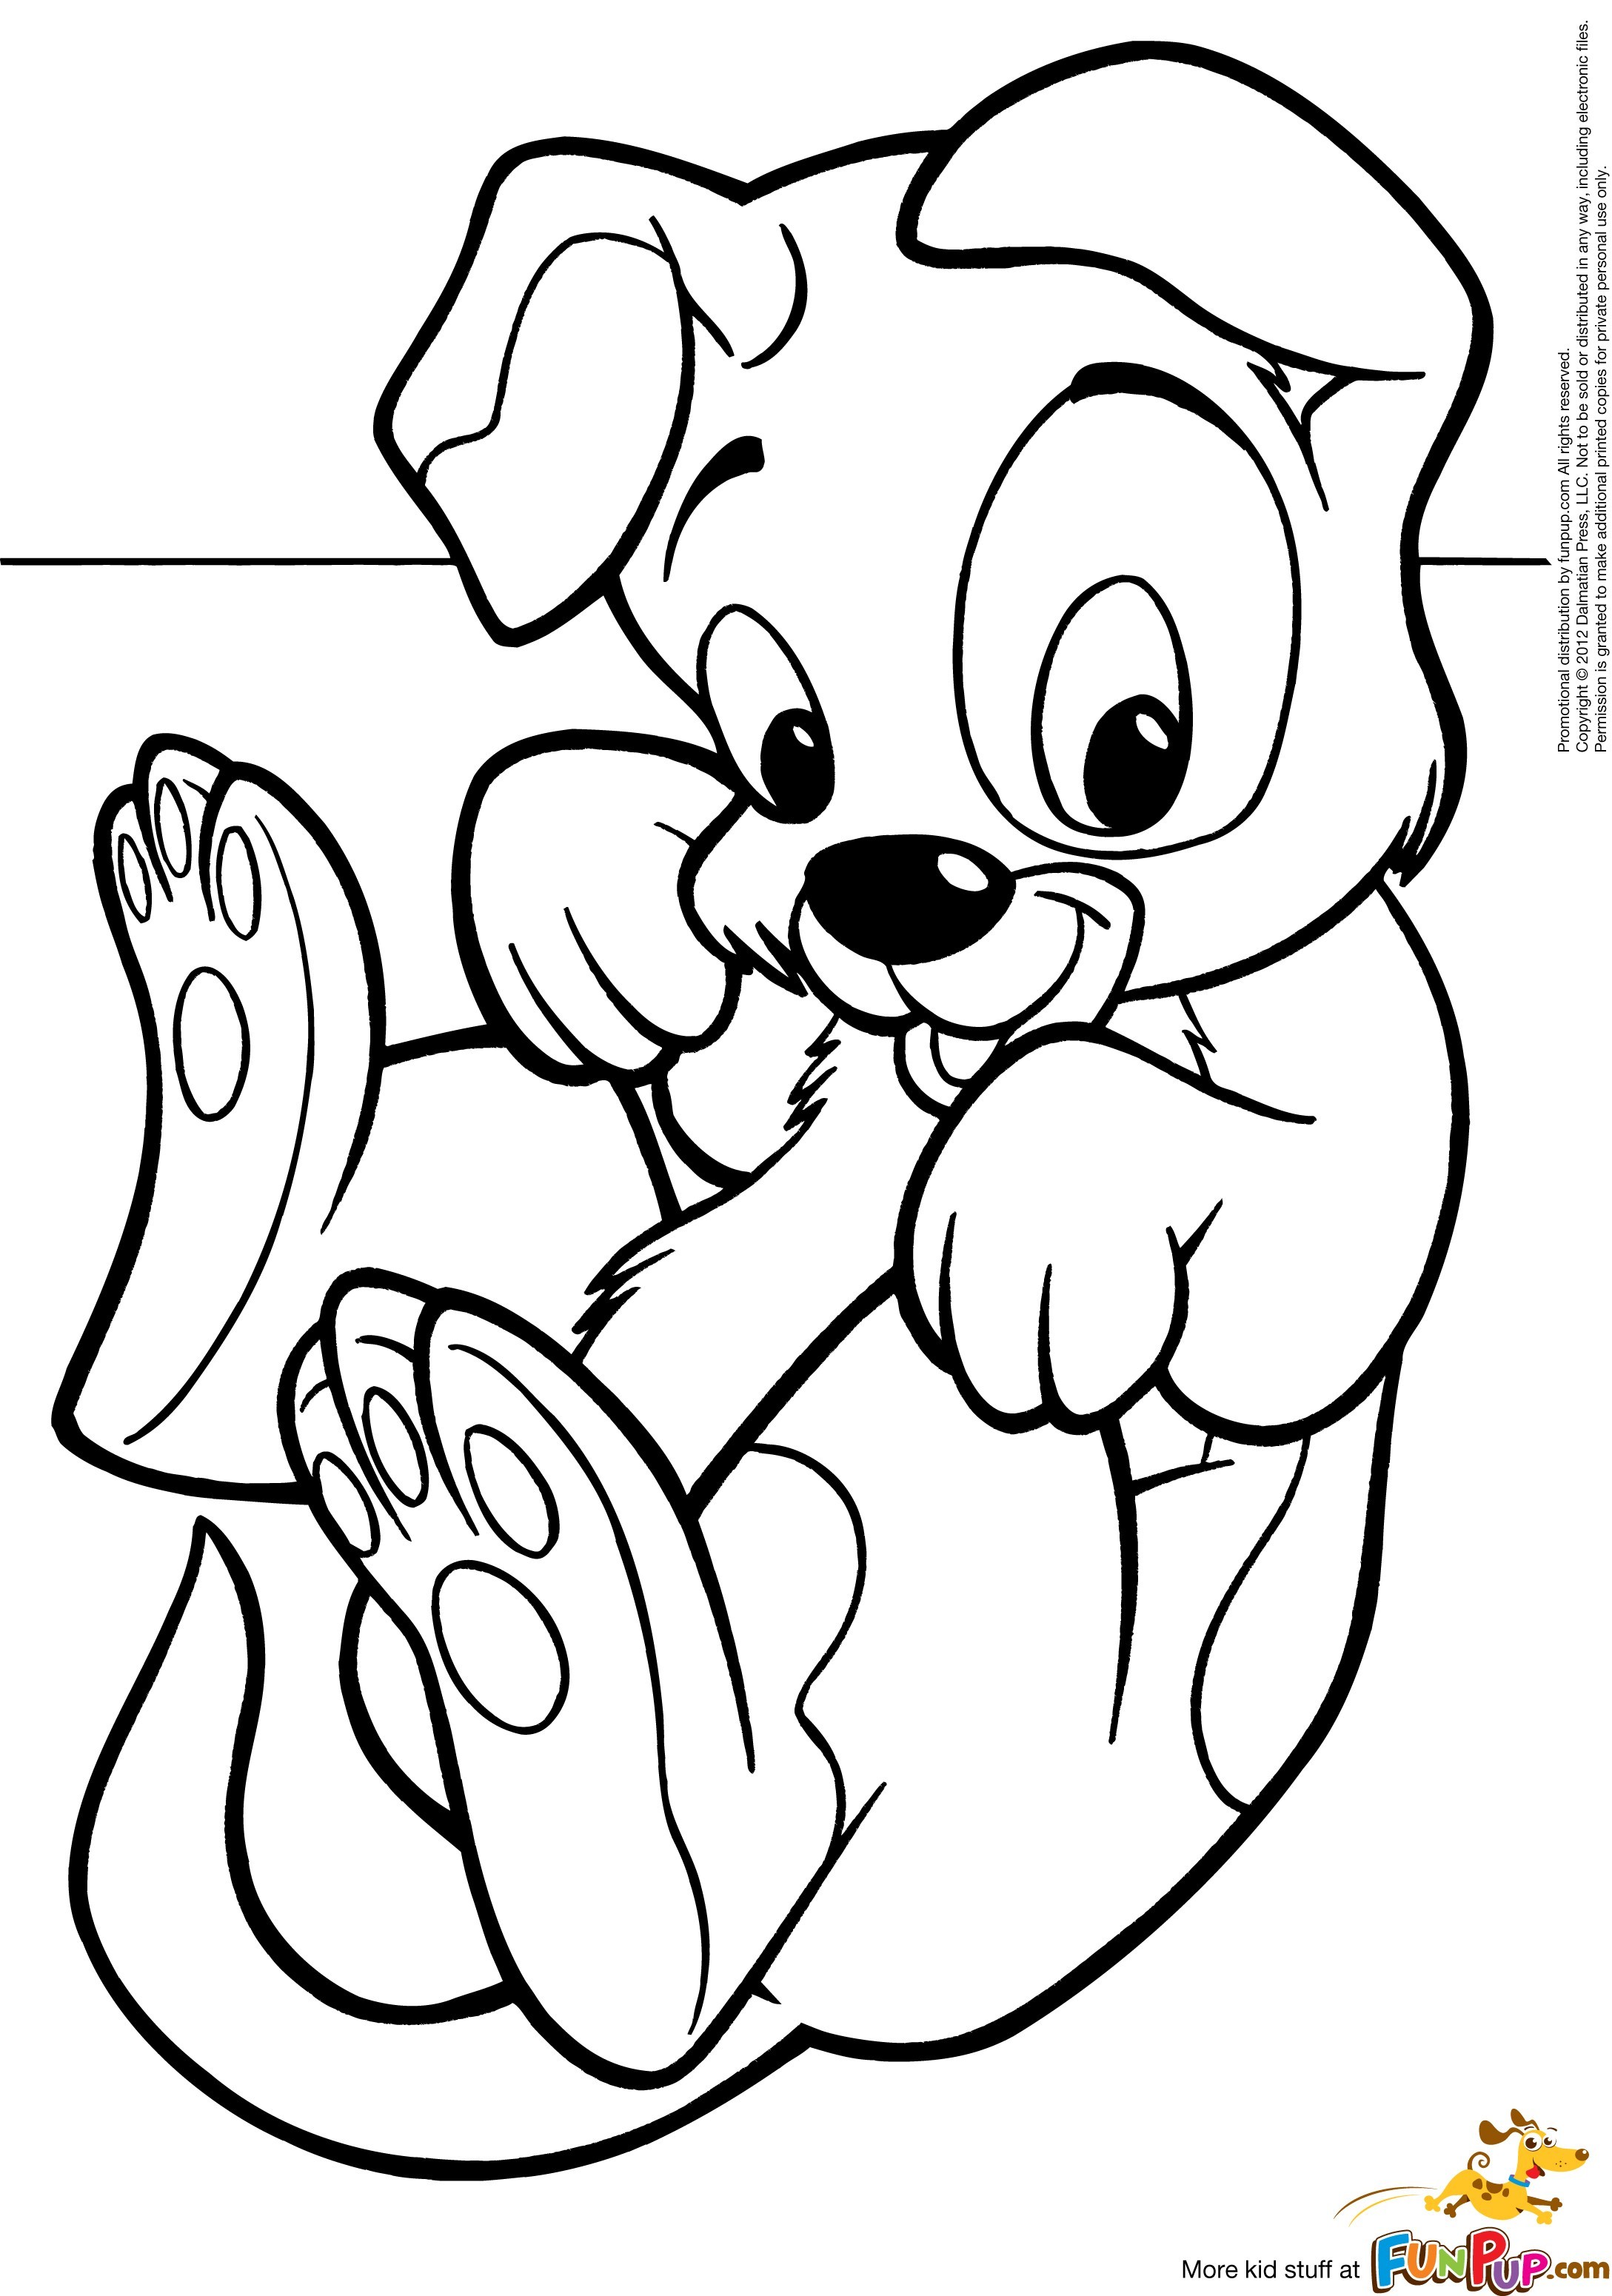 puppy-coloring-page-0131-q1